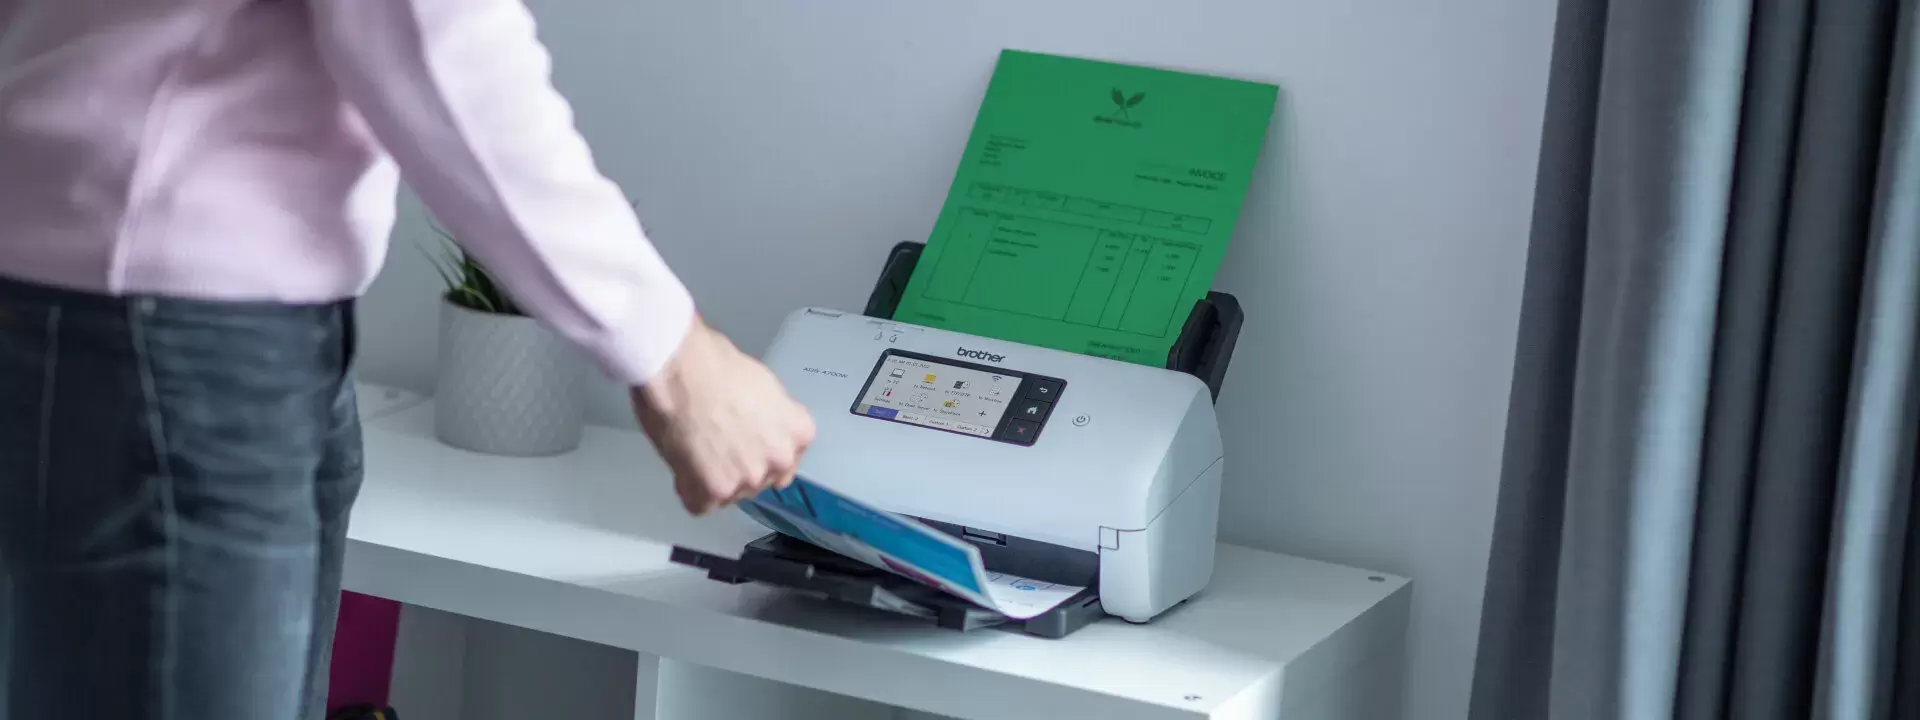 Office Scanner Do's and Don'ts